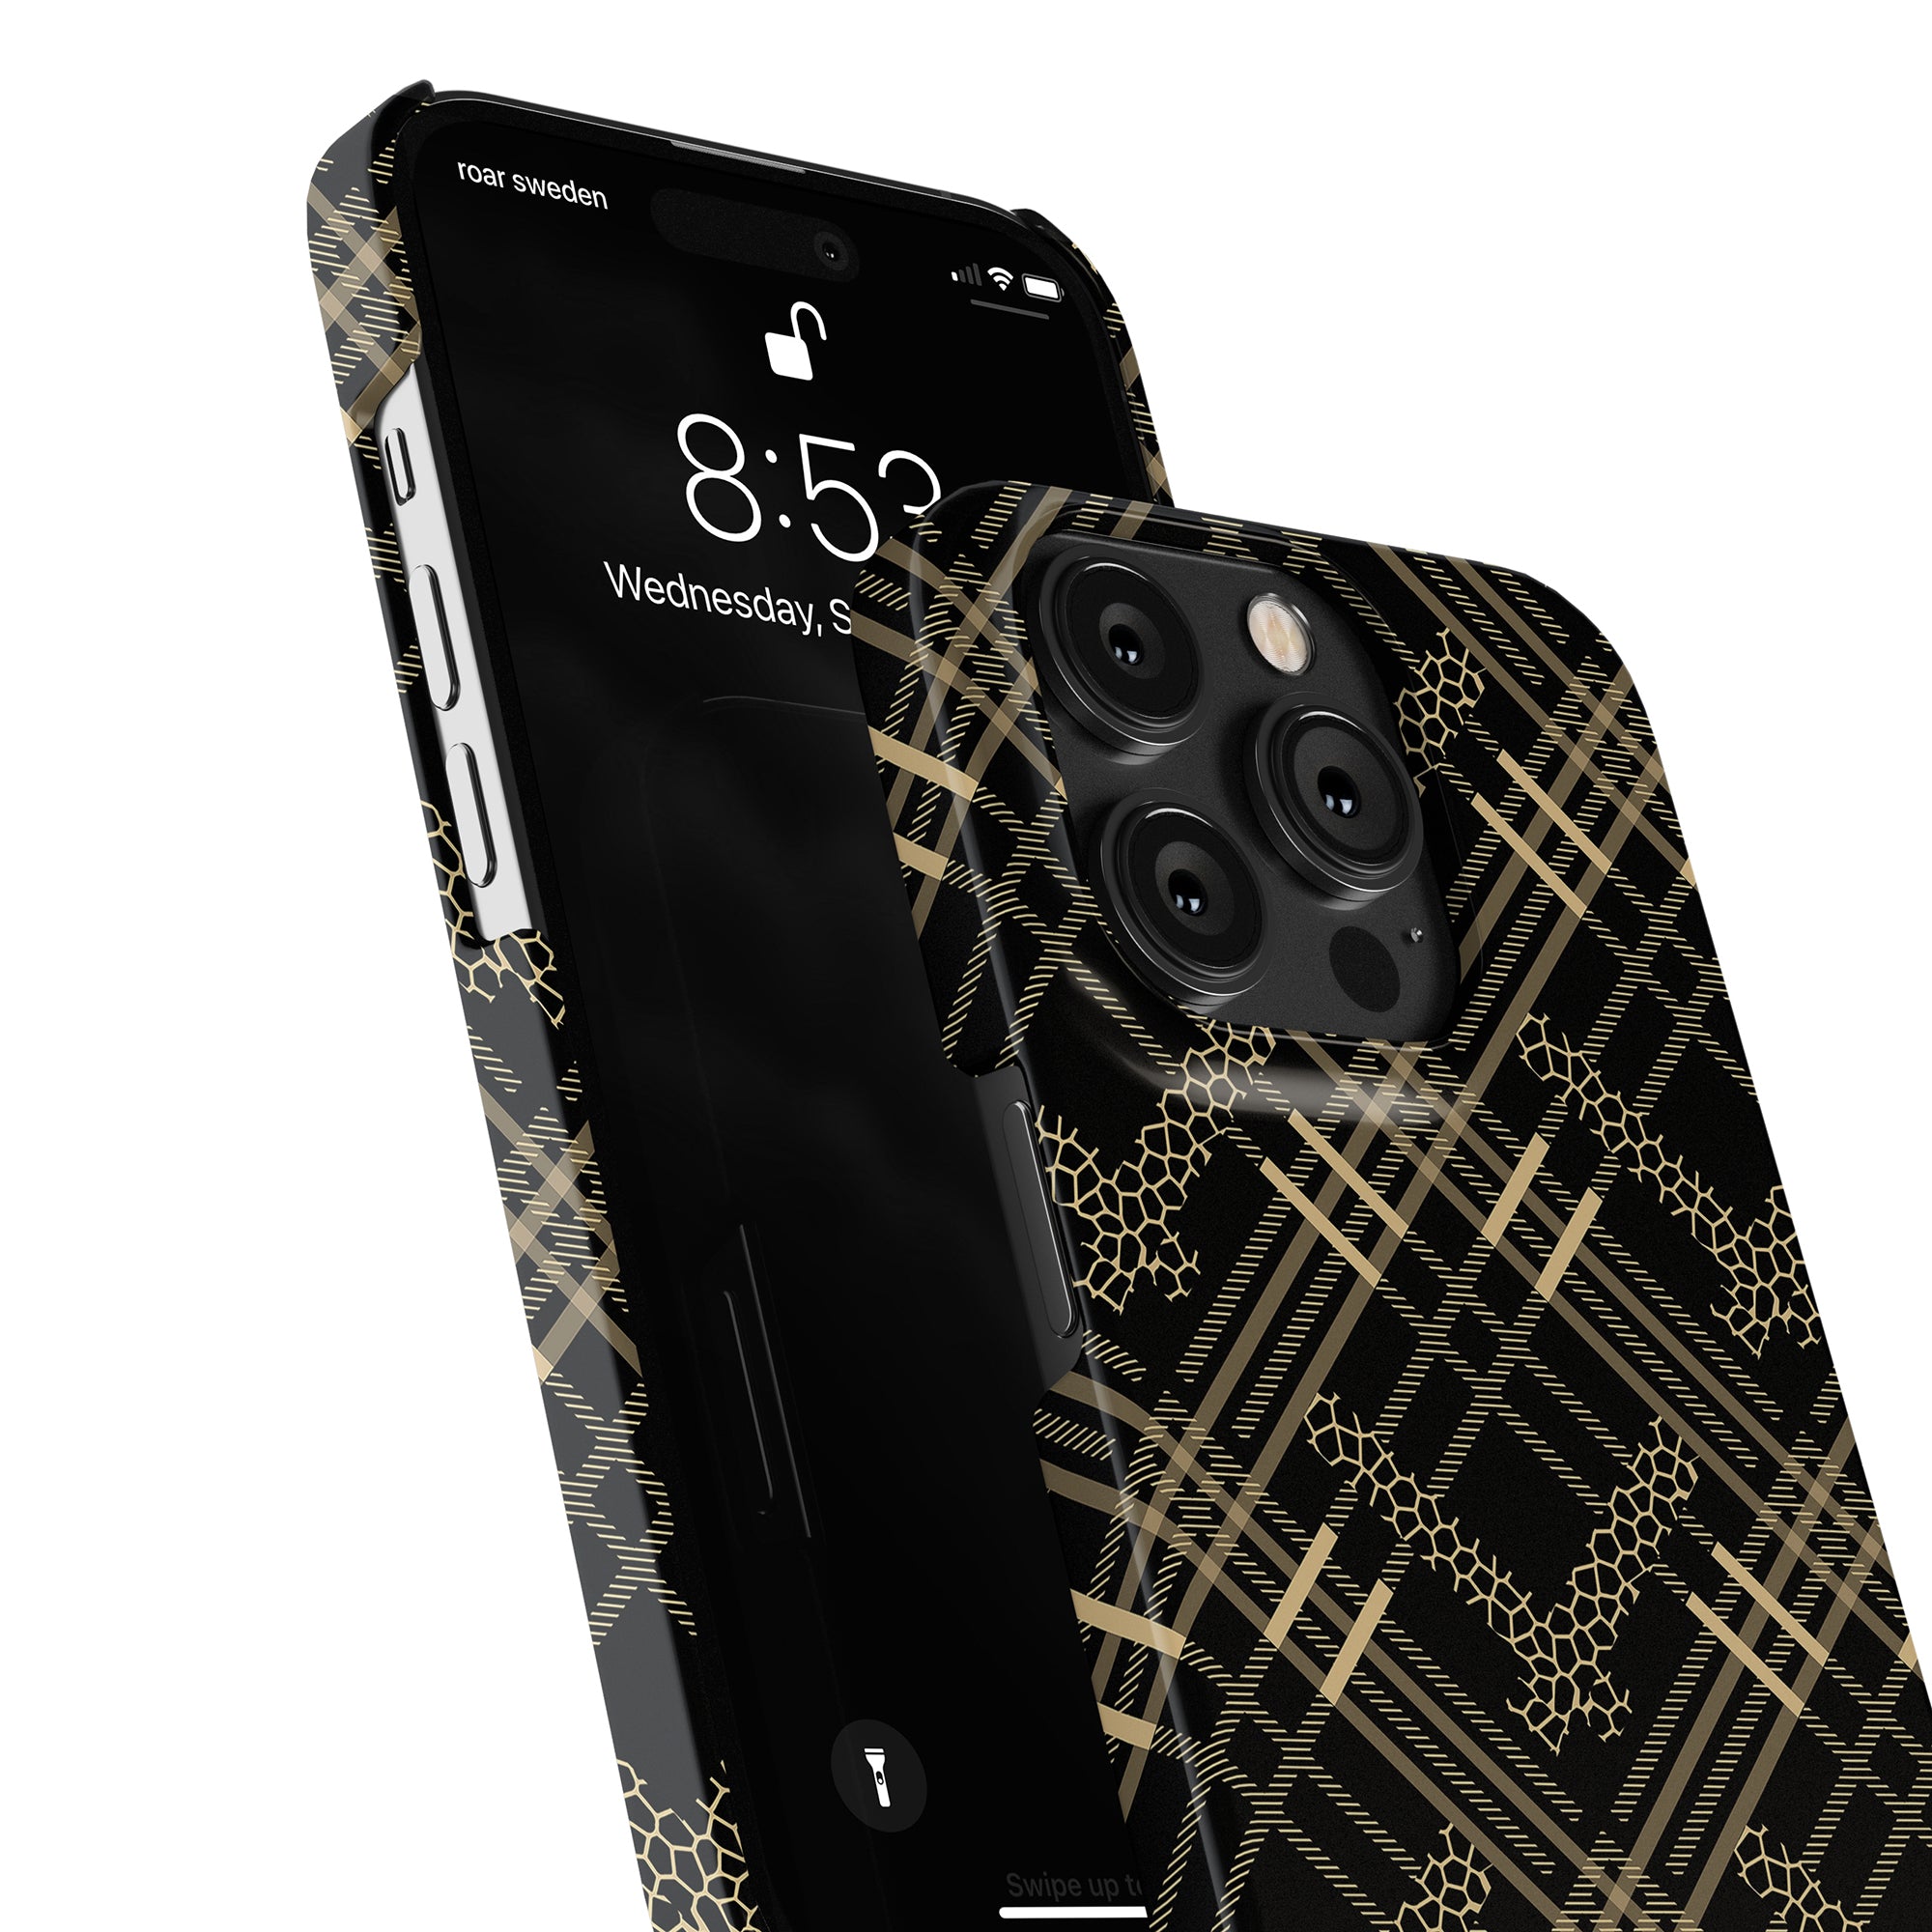 A Tartan Leo - Slim Case for the iPhone 11 Pro, featuring a stylish black and gold plaid design.